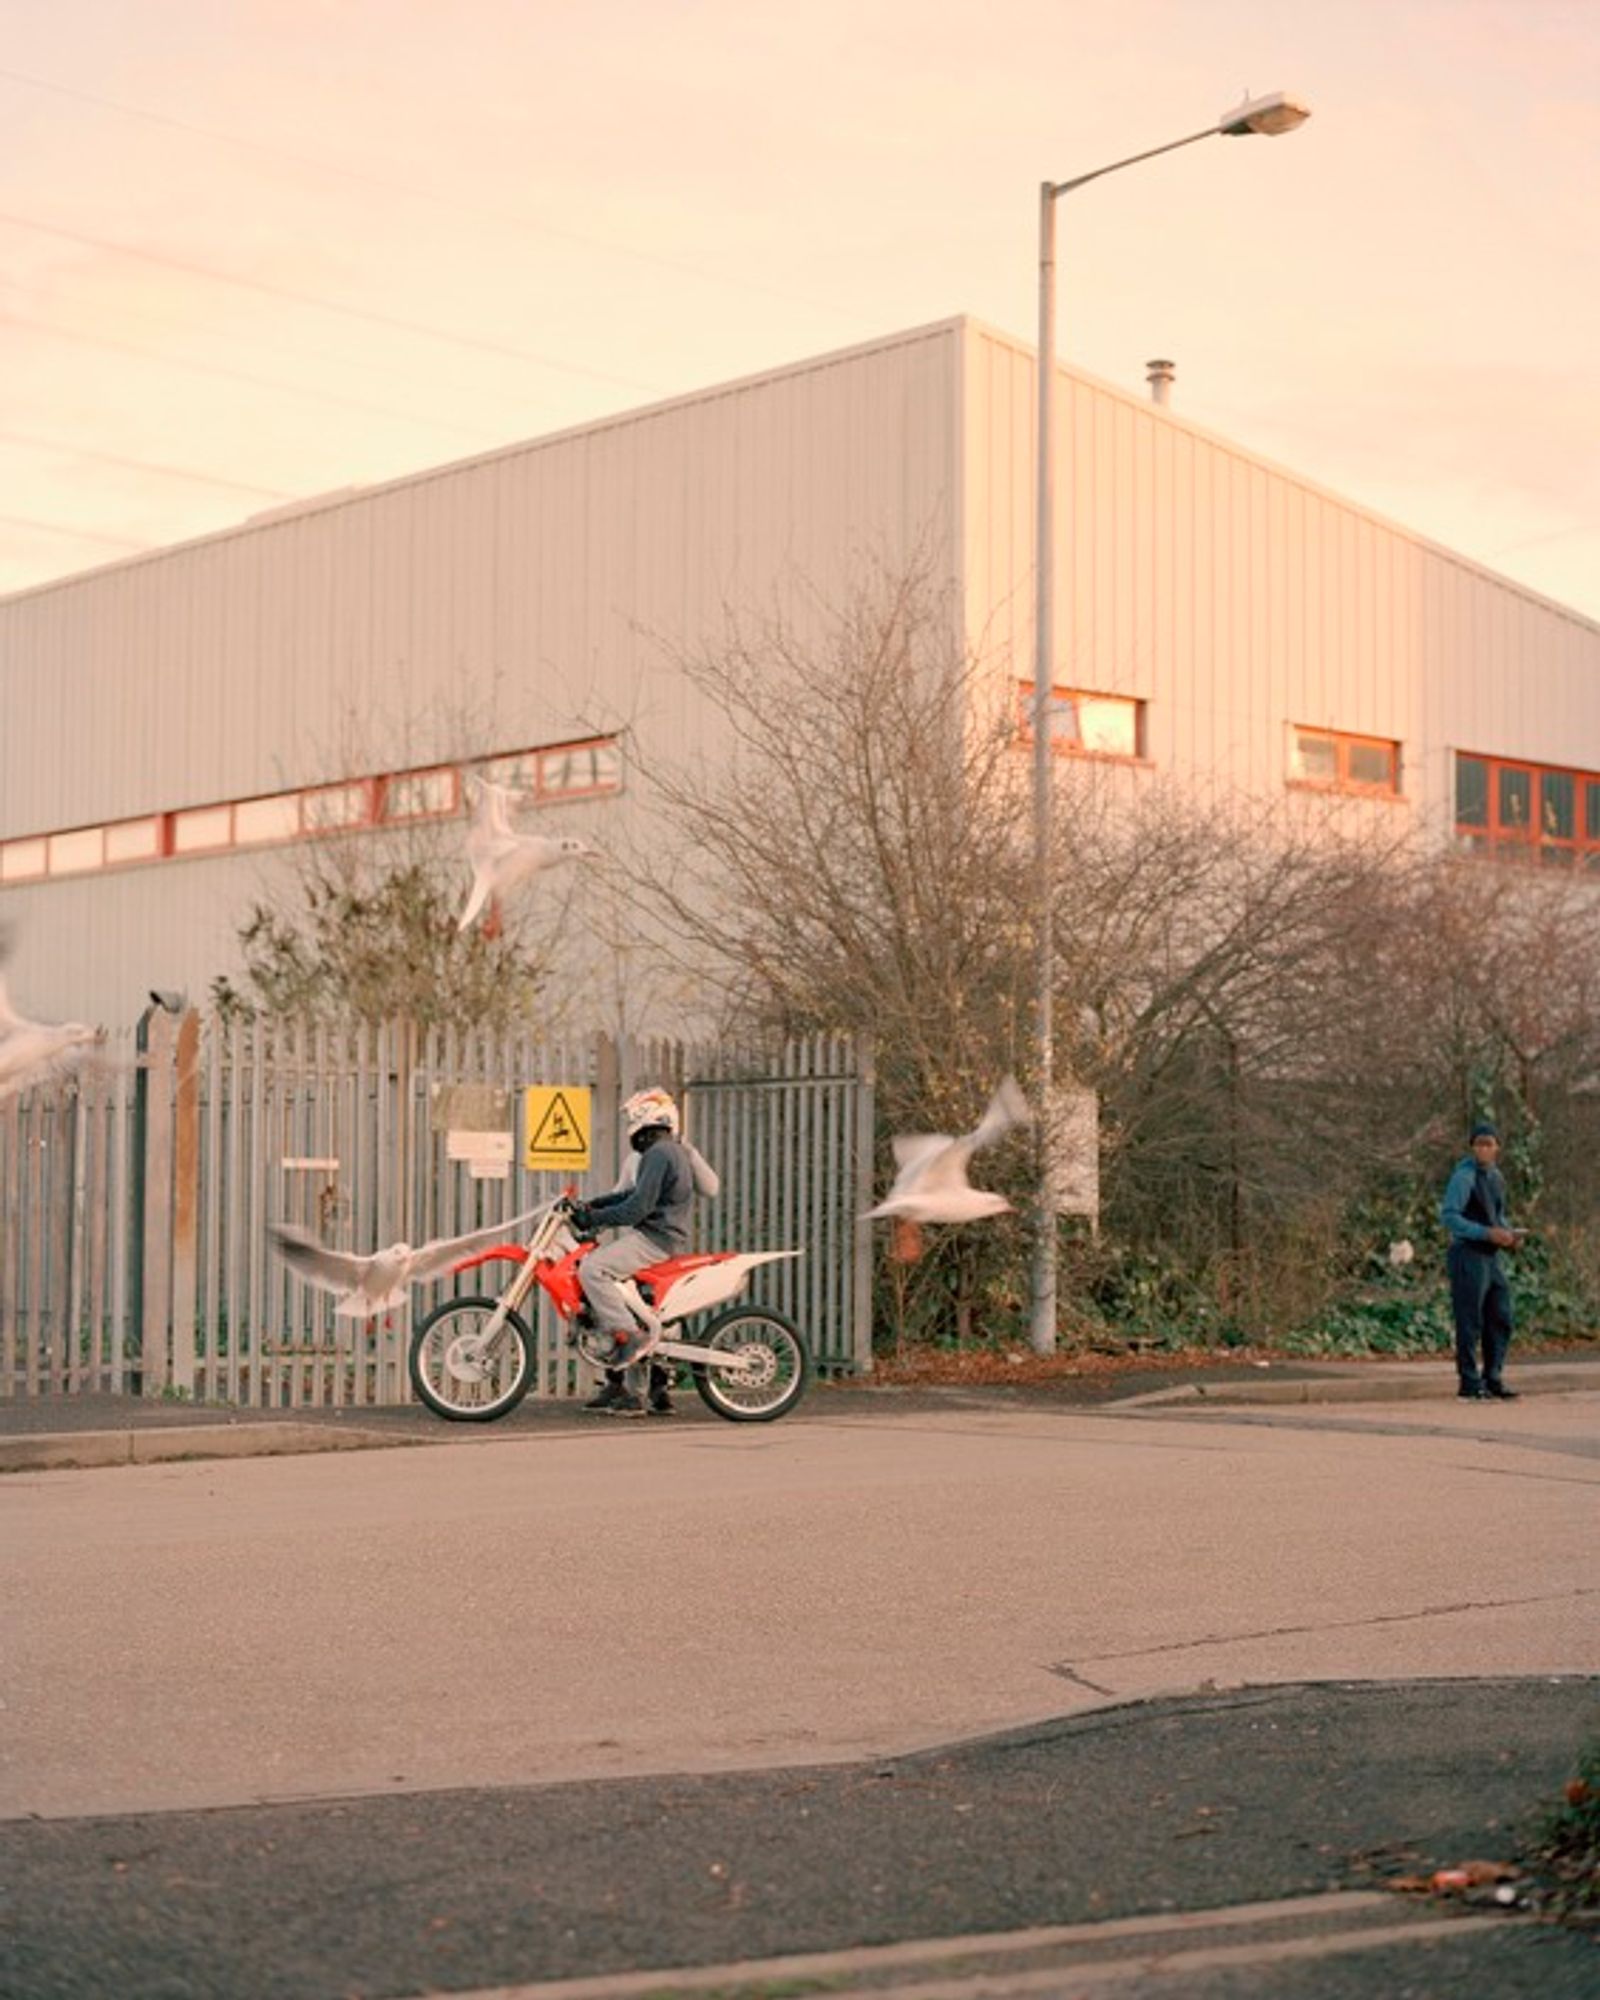 © Cian Oba-smith - Image from the BIkelife photography project